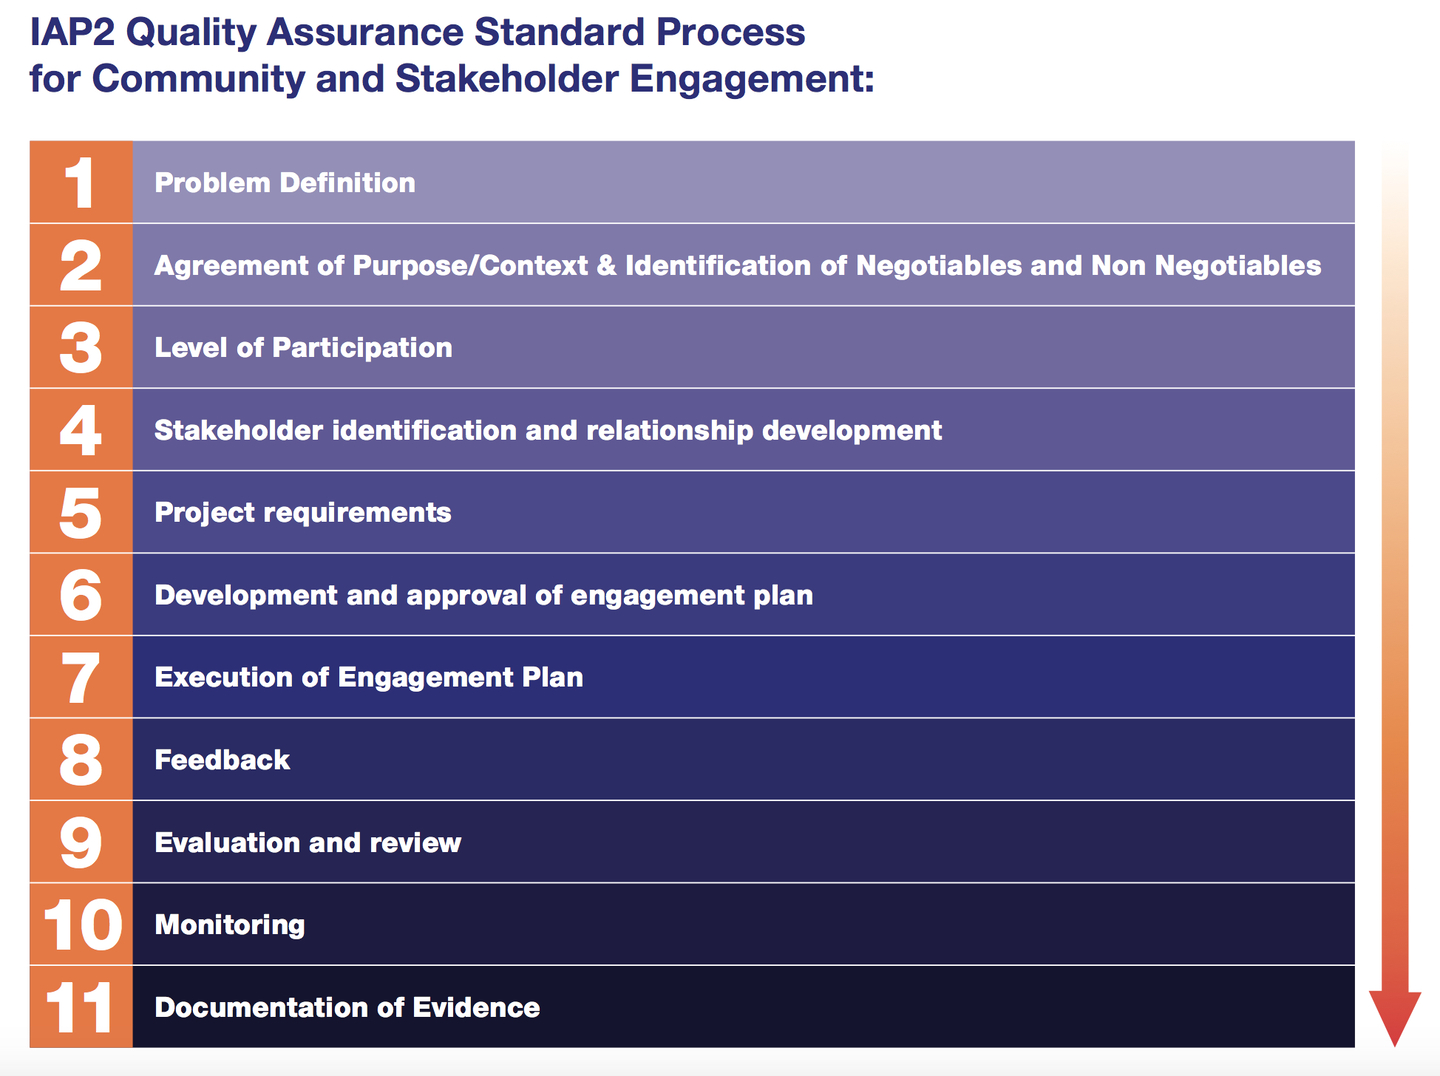 This illustration of the IAP2 Quality Assurance Standard Process for Community and Stakeholder Engagement describes the steps, strategies, and characteristics of a high-quality community-engagement process that can be applied in wide variety of contexts and with diverse stakeholders and groups.